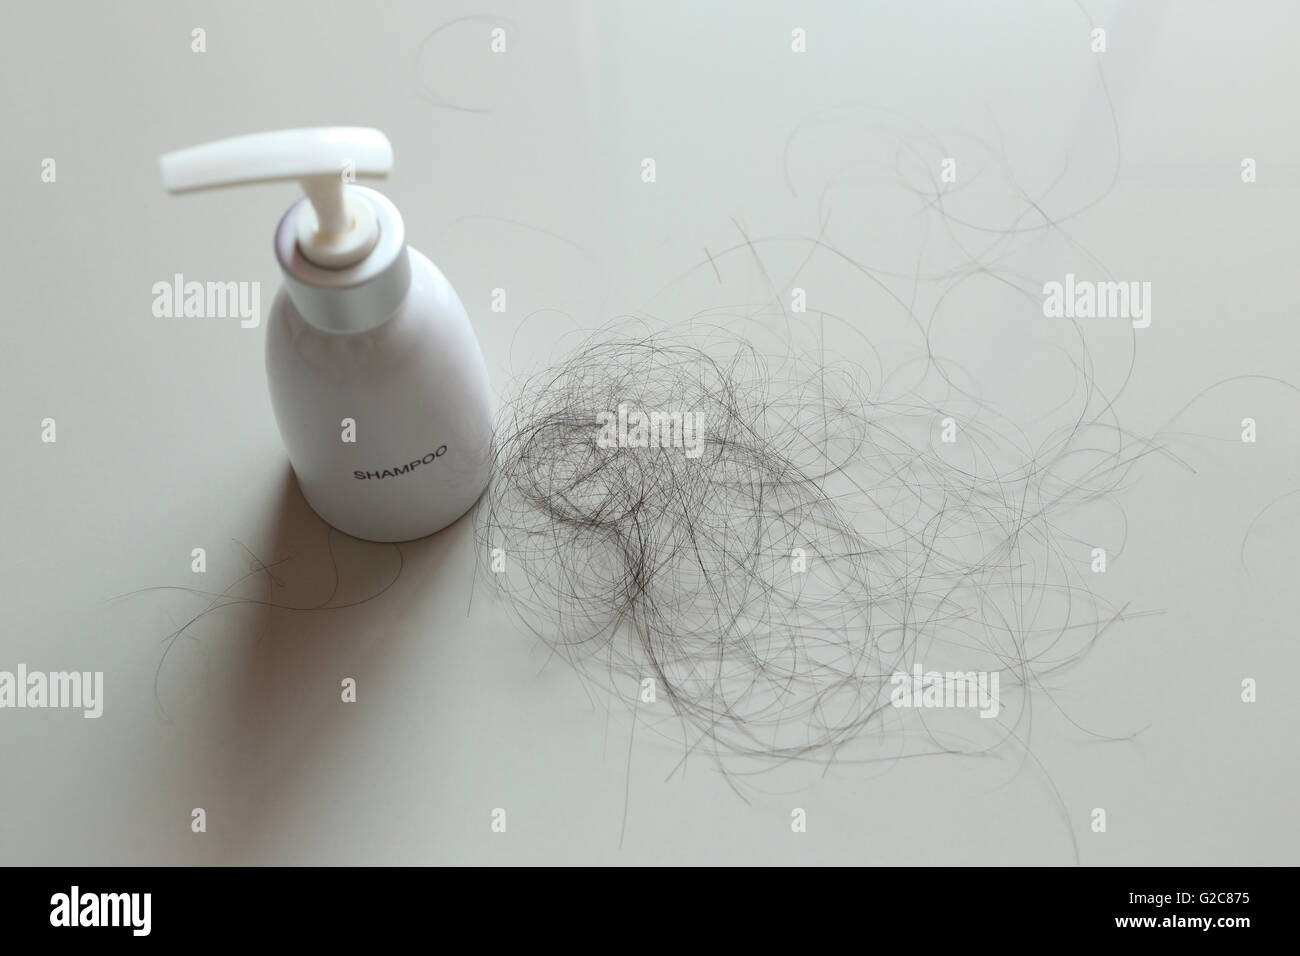 White Bottle of shampoo and hair loss on white fabric in concept healthcare. Stock Photo